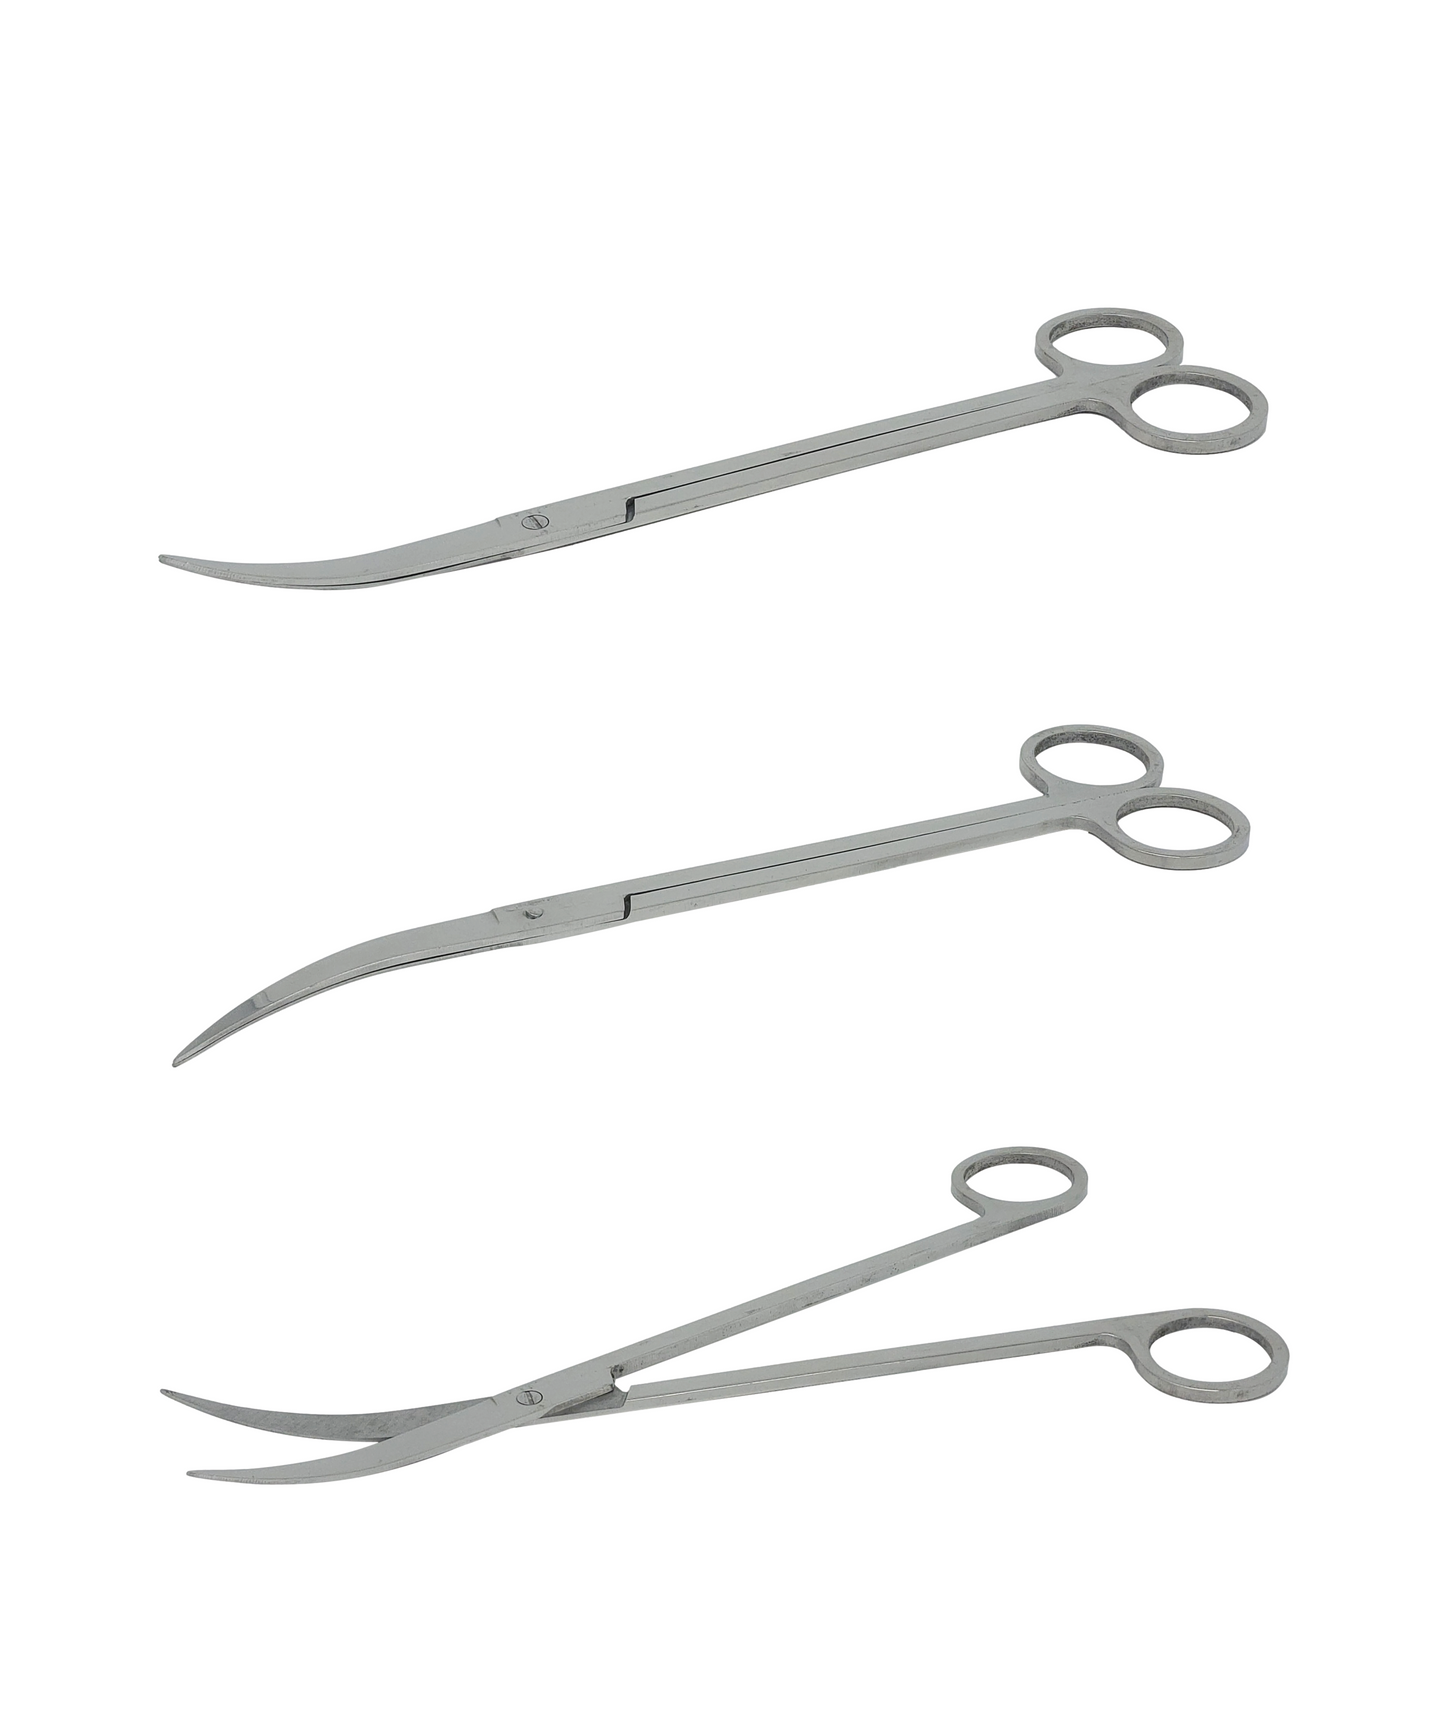 Stainless Scissors Curved, 25cm